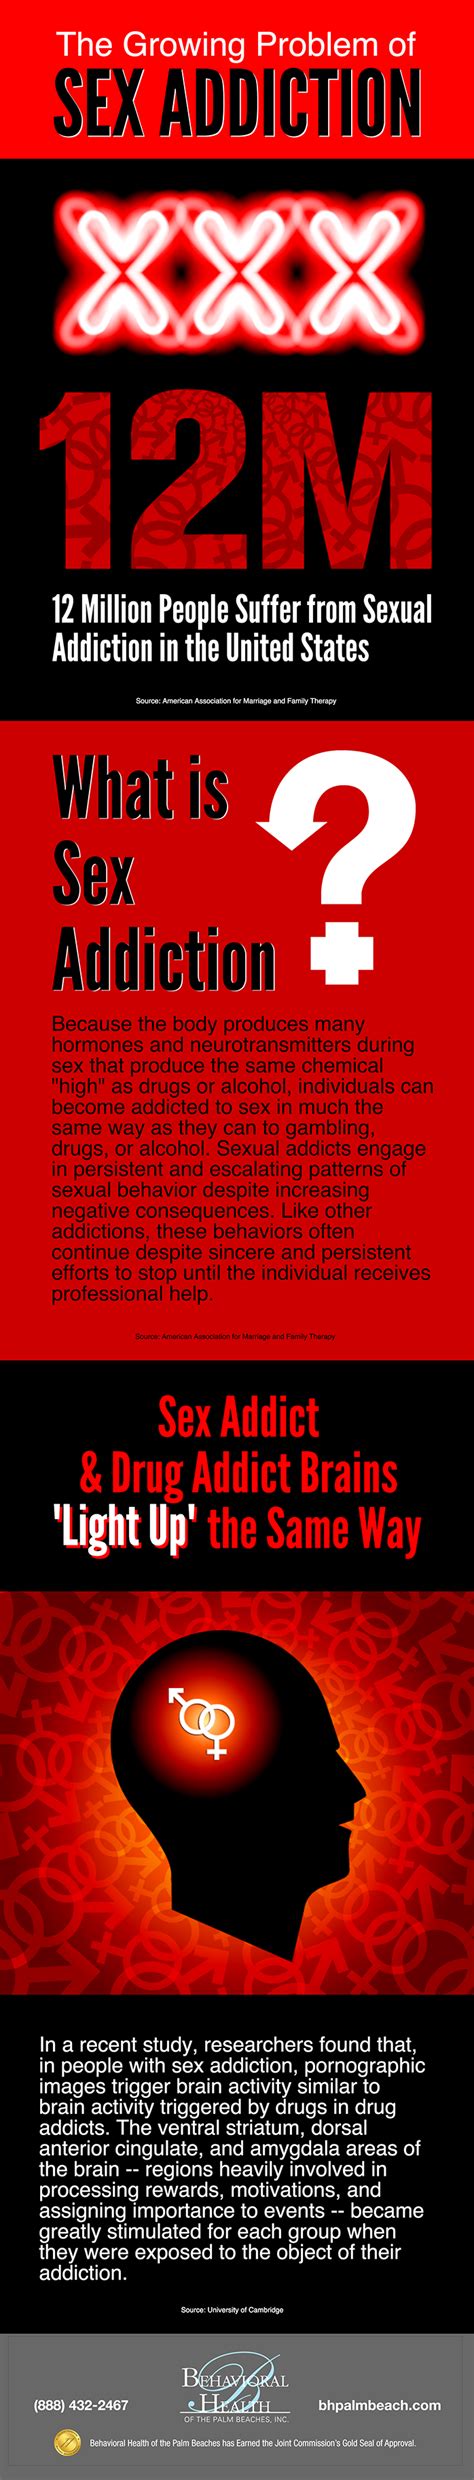 infographic the growing problem of sex addiction behavioral health of the palm beaches